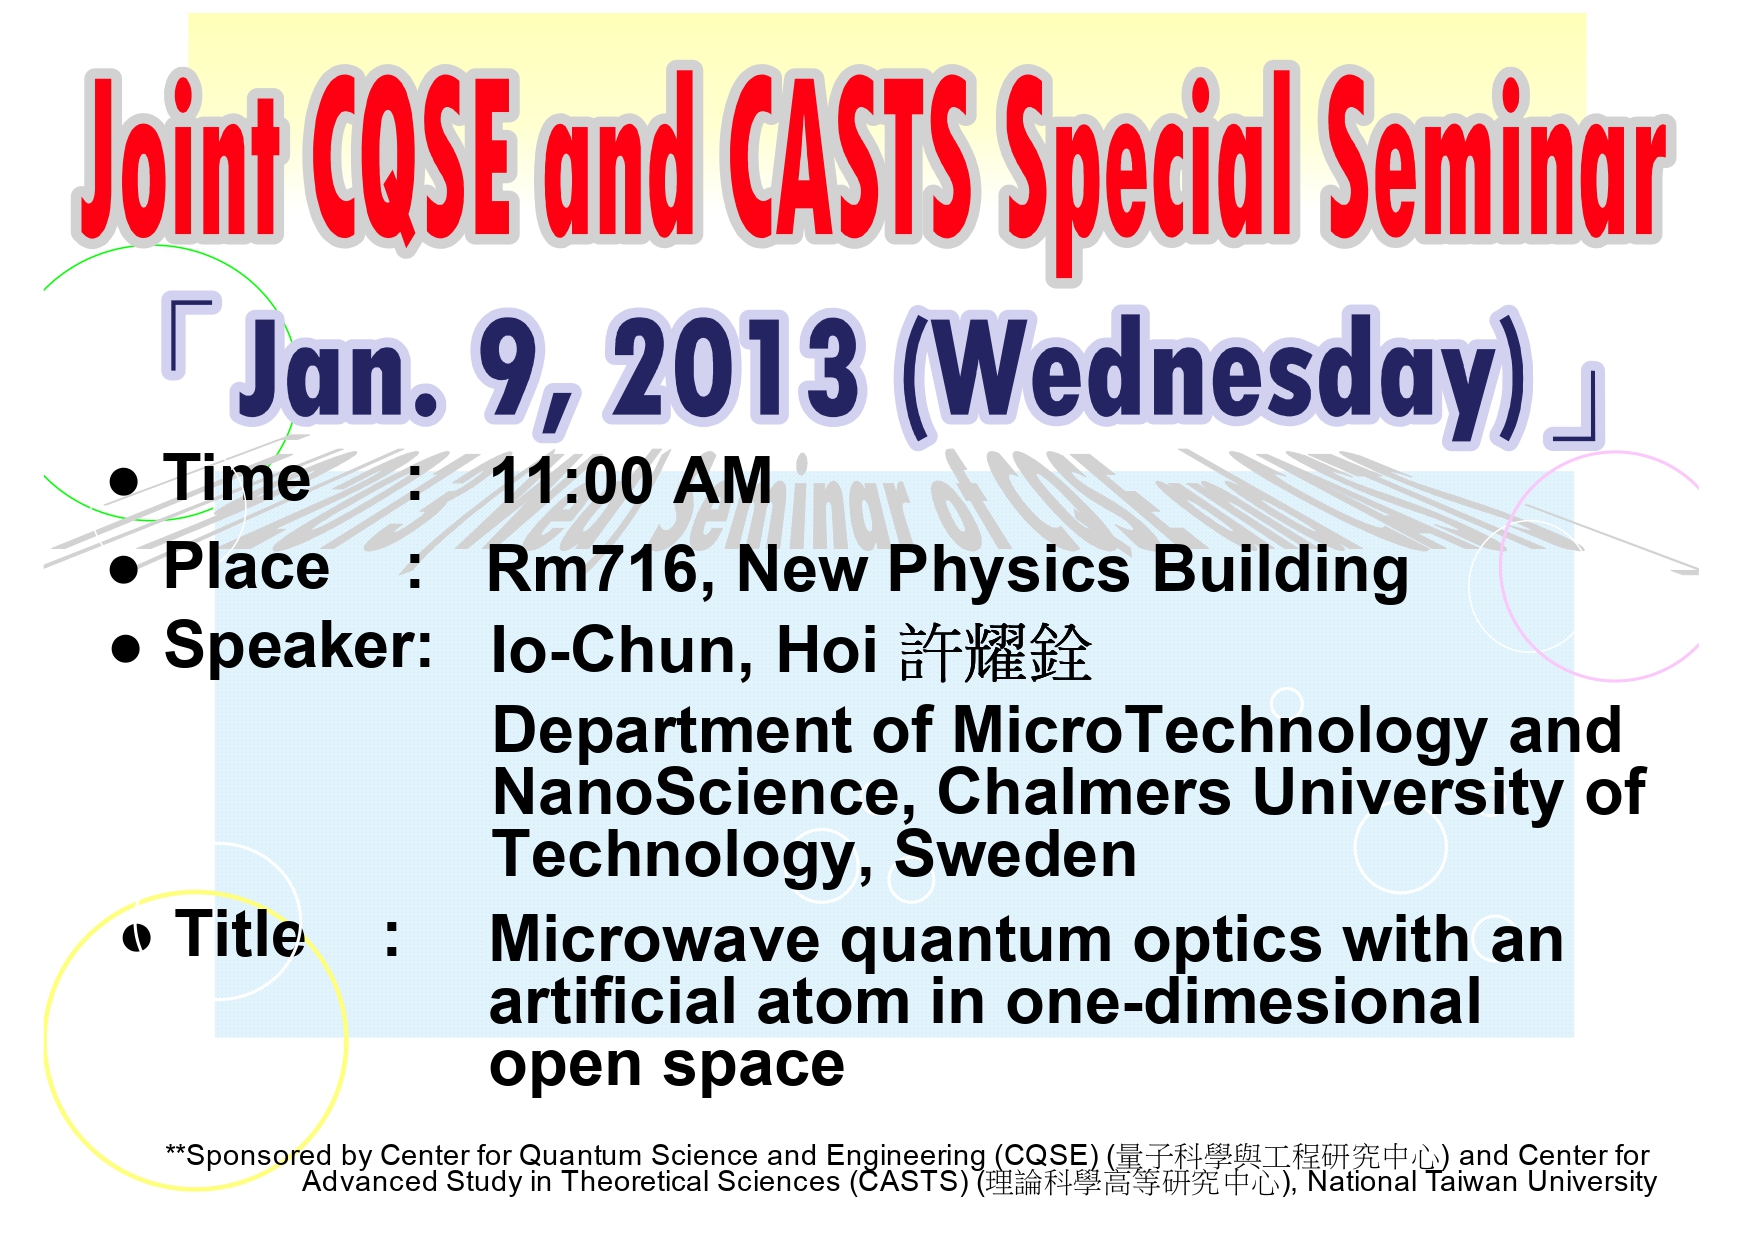 Joint CQSE and CASTS Special Seminar